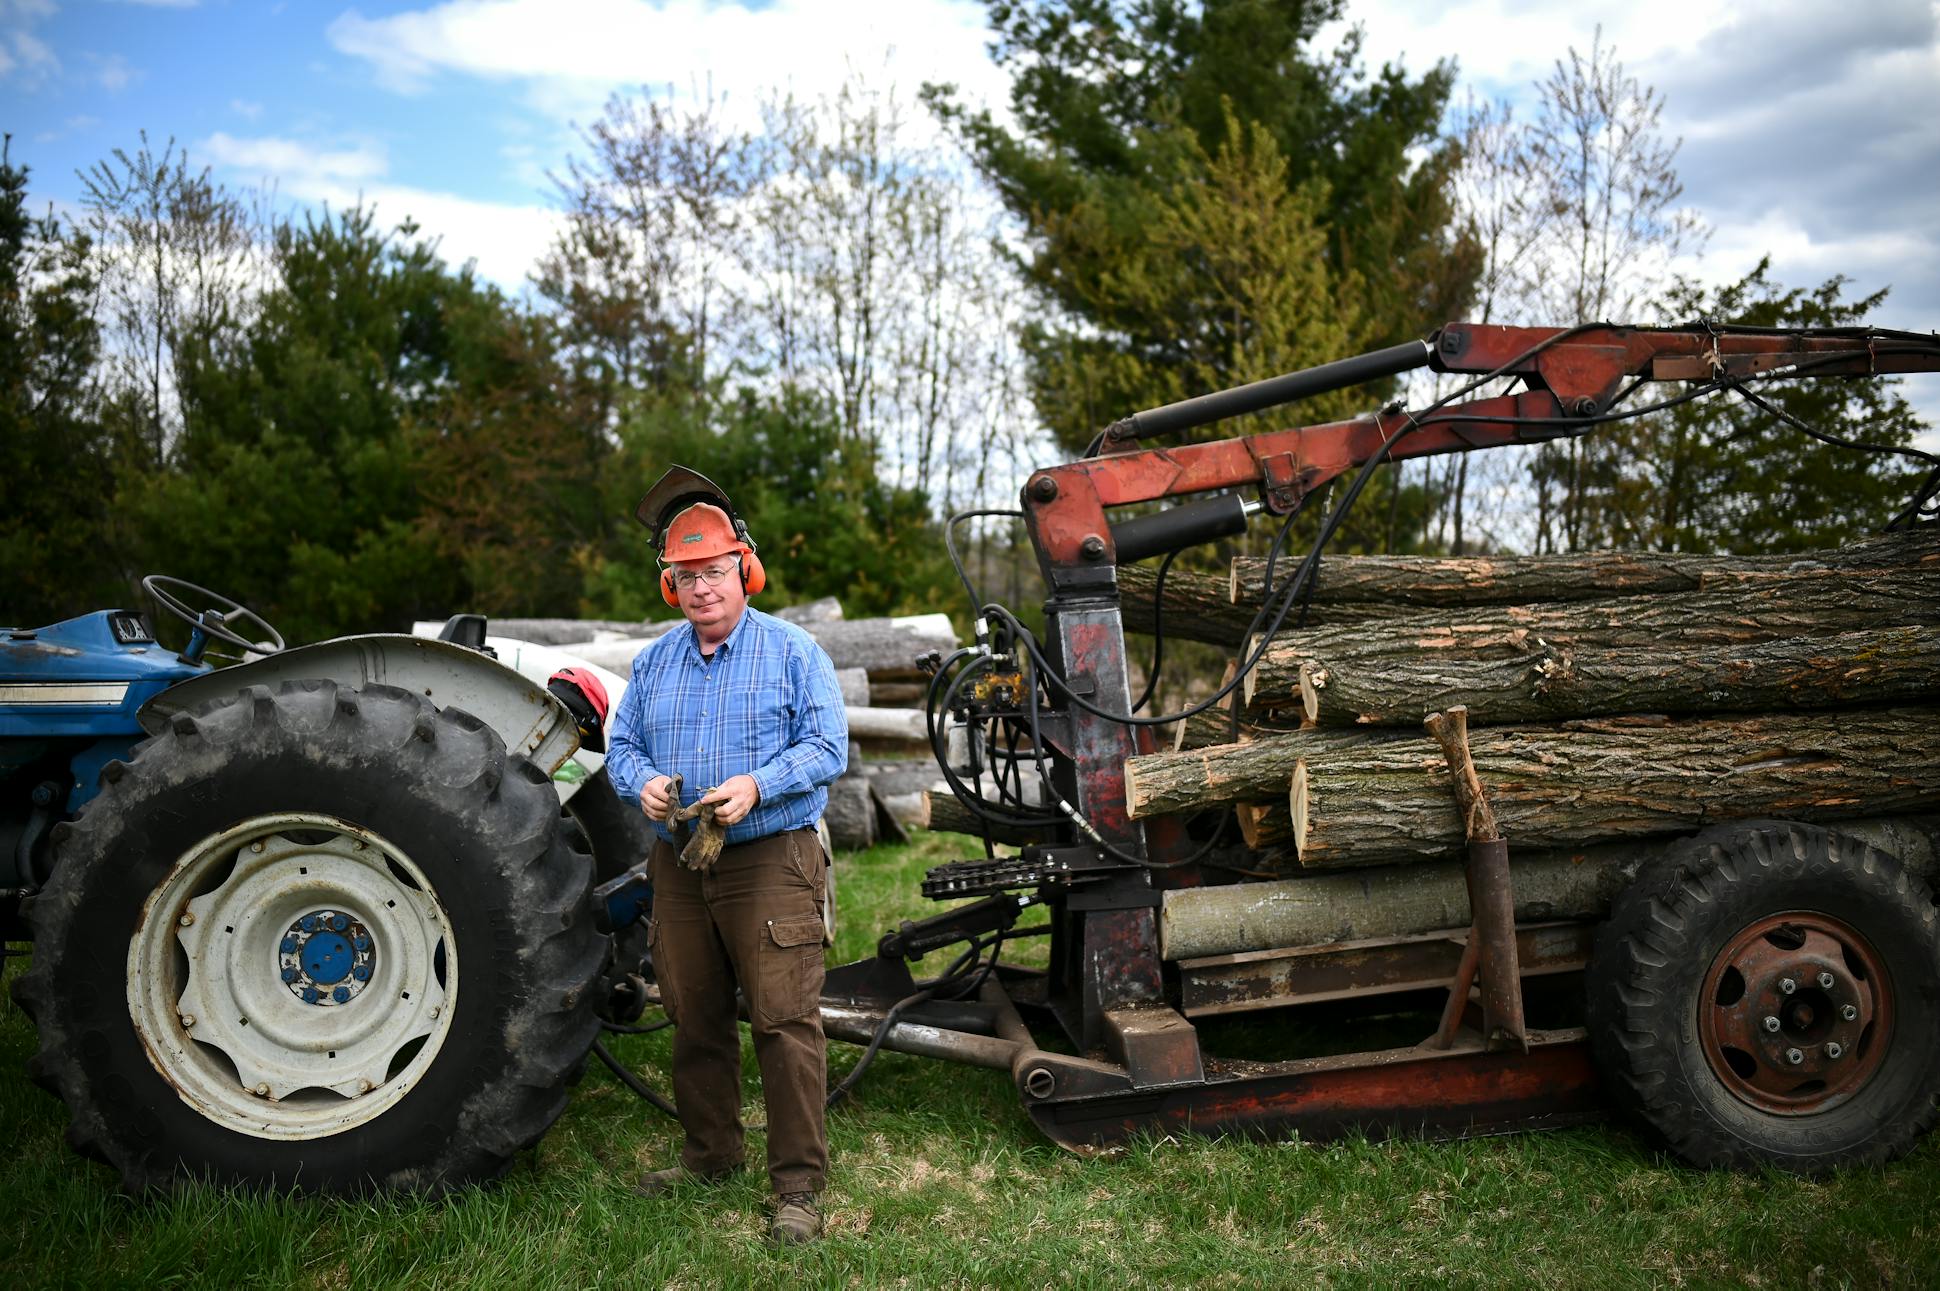 John Bobbe works his small farm near Stevens Point, Wis., but he works cases of suspect grain from all over the world.